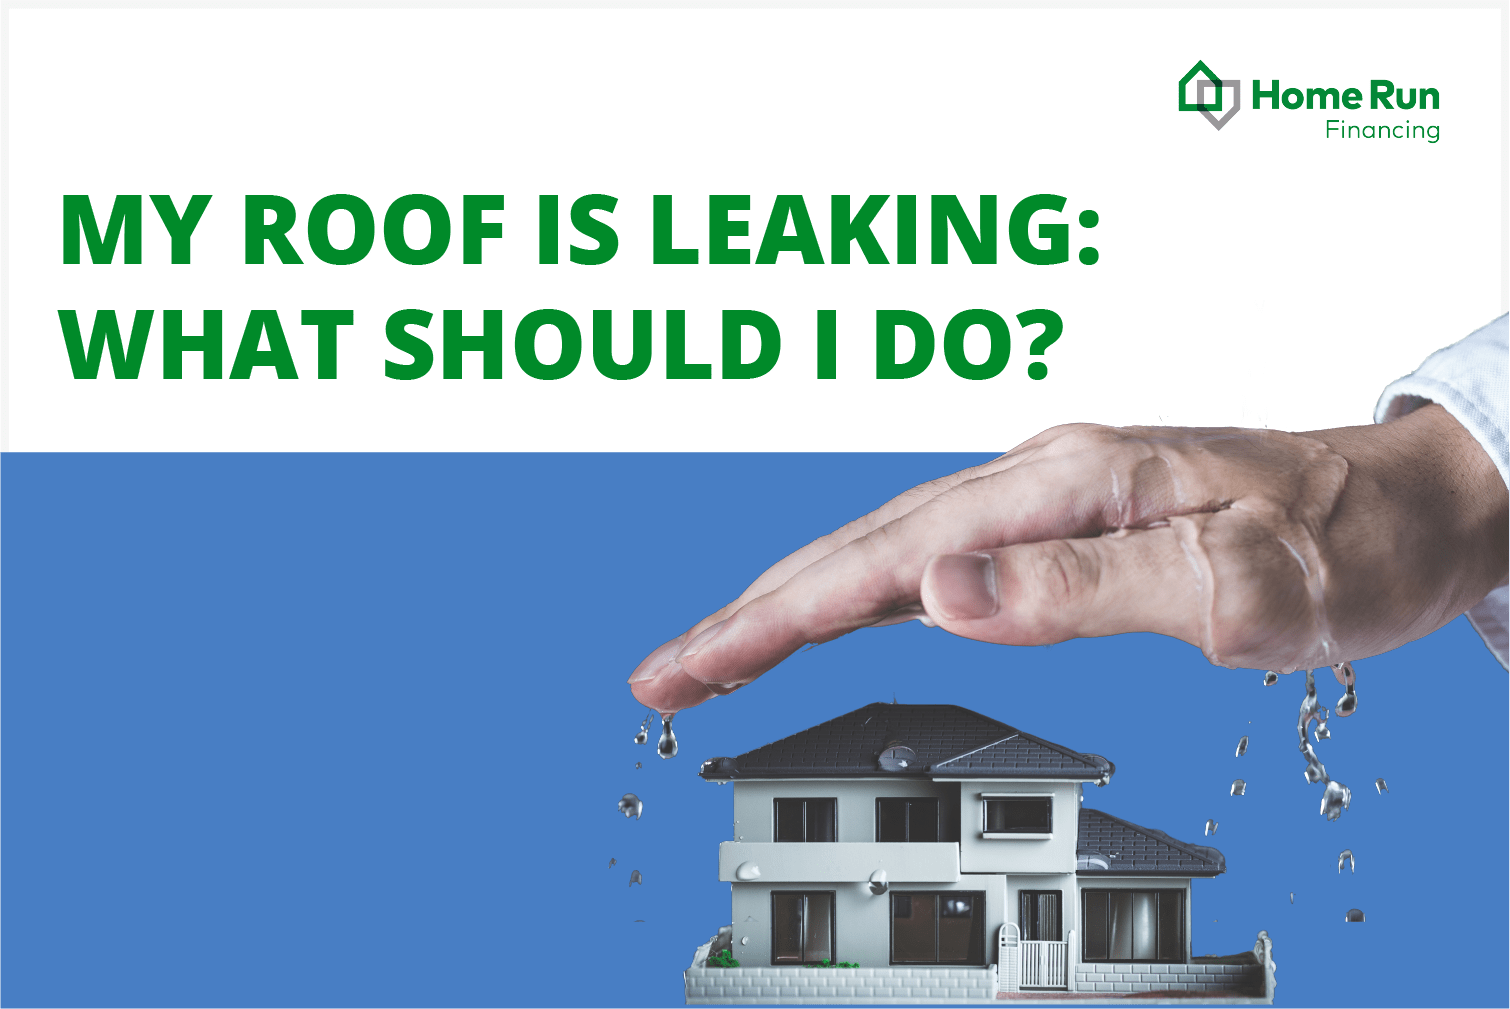 My roof is leaking: what should I do?